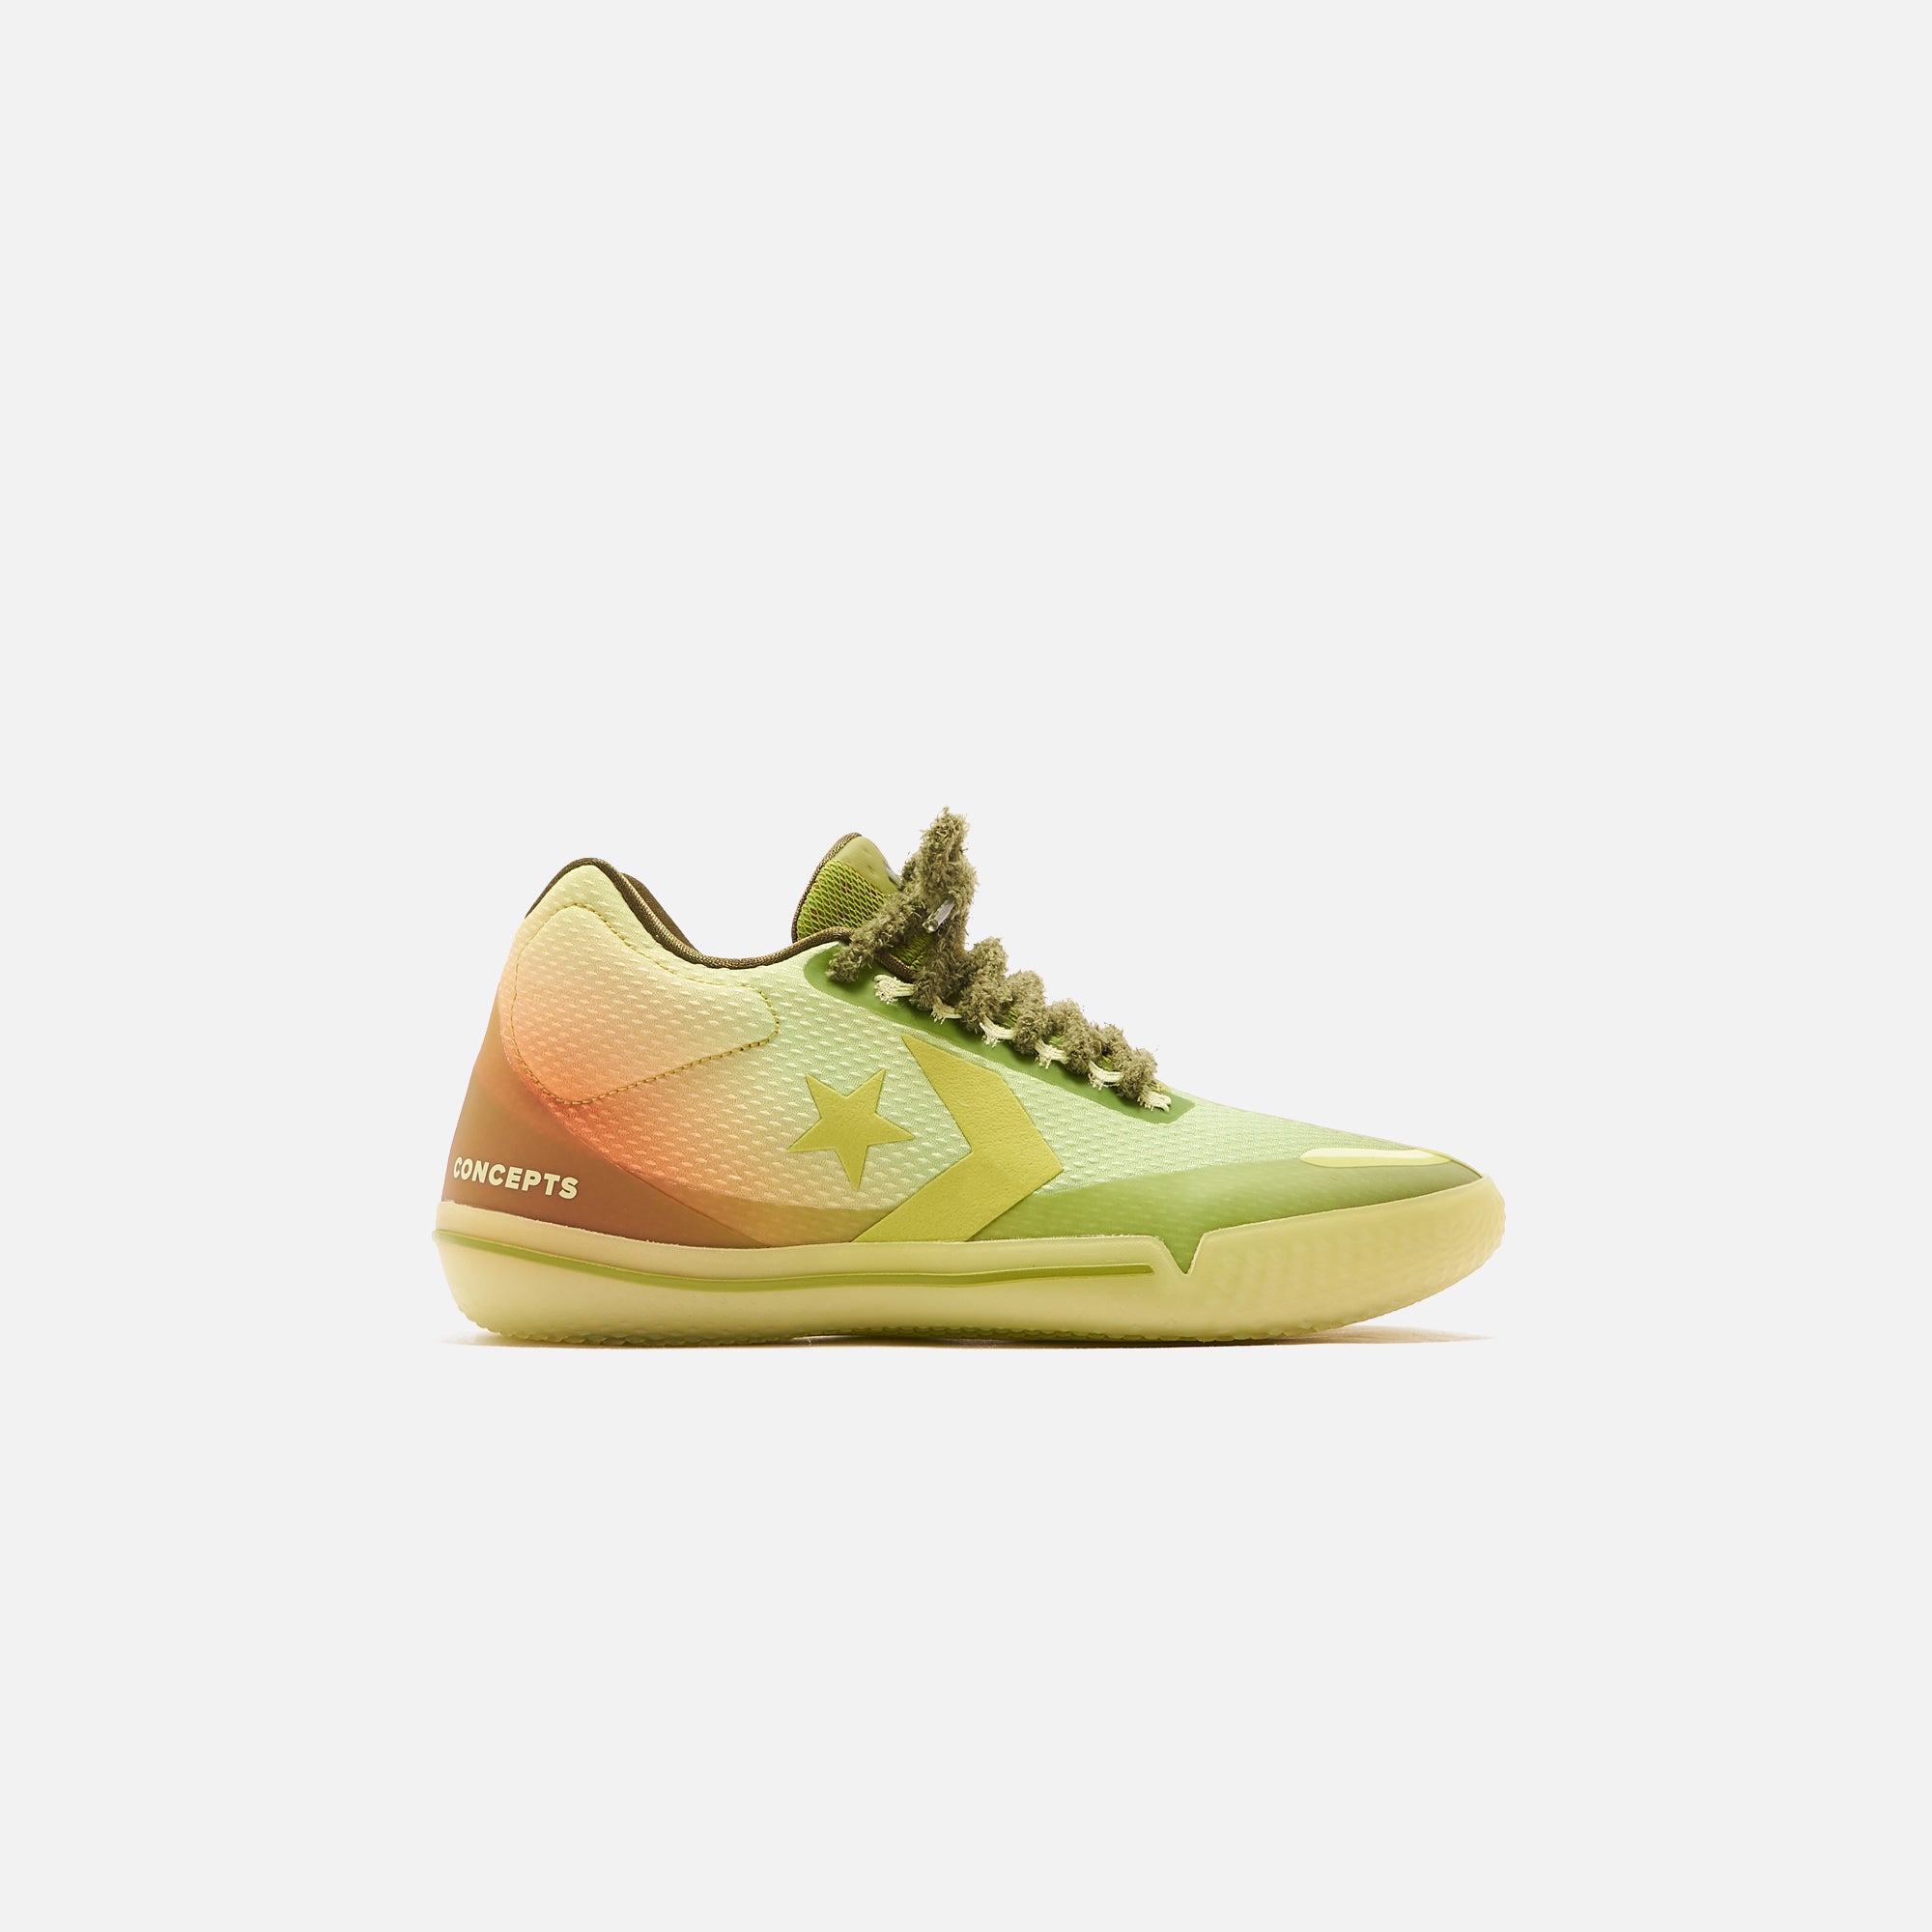 Converse x CNCPTS All Star BB EVO - Shadow Lime / Green Oasis